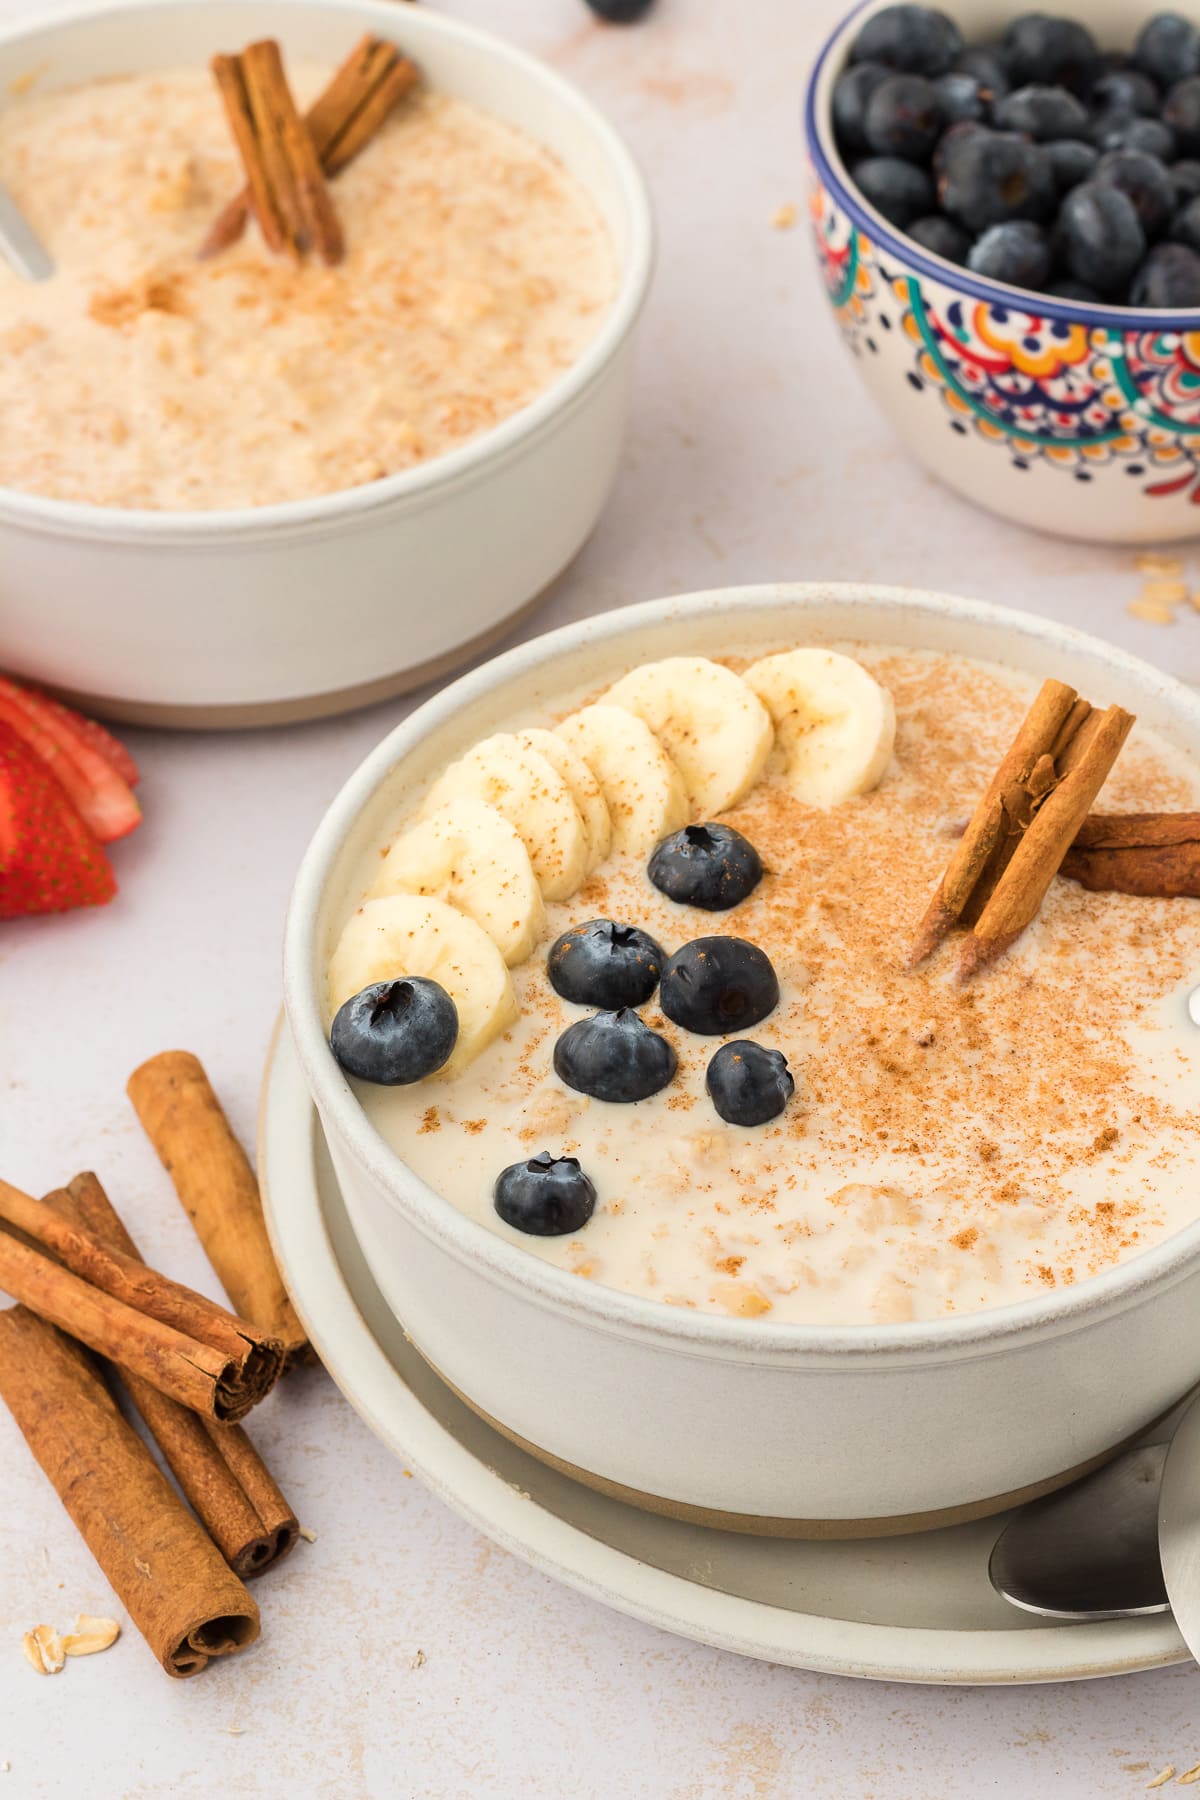 Bowls of Mexican oatmeal recipe filled with blueberries, cinnamon sticks, and bananas.